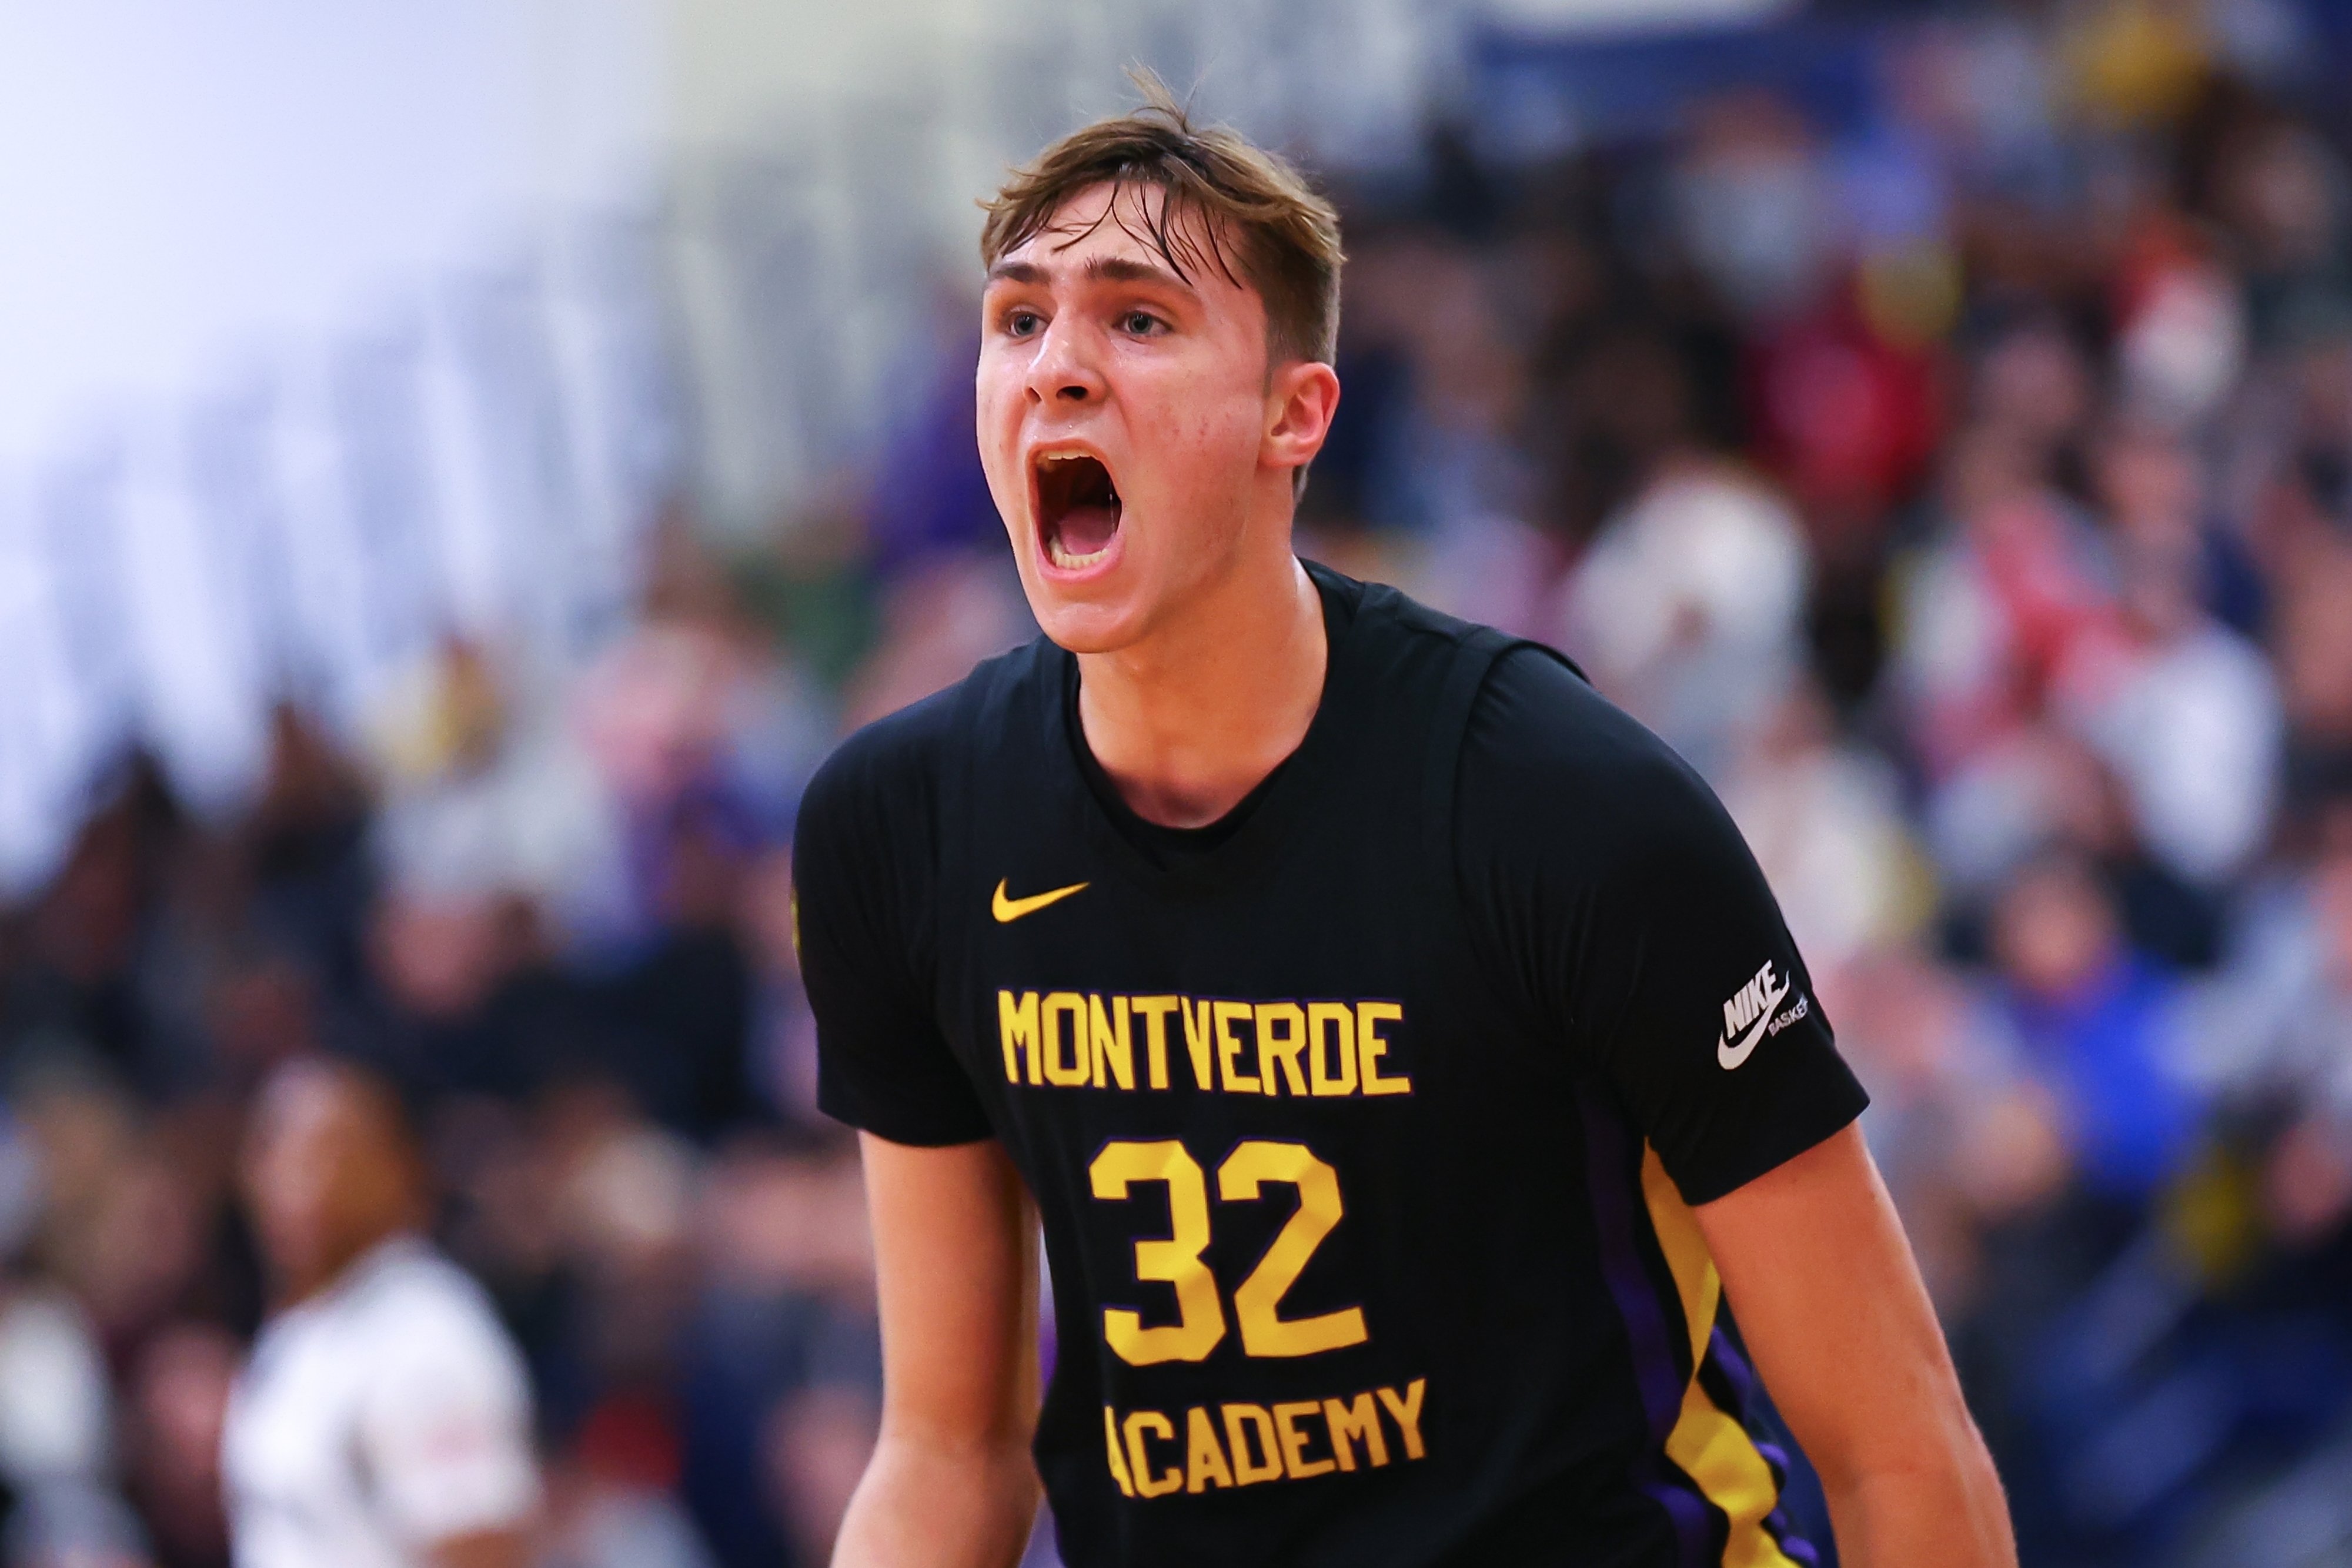 Basketball player in Montverde Academy jersey celebrates during a game